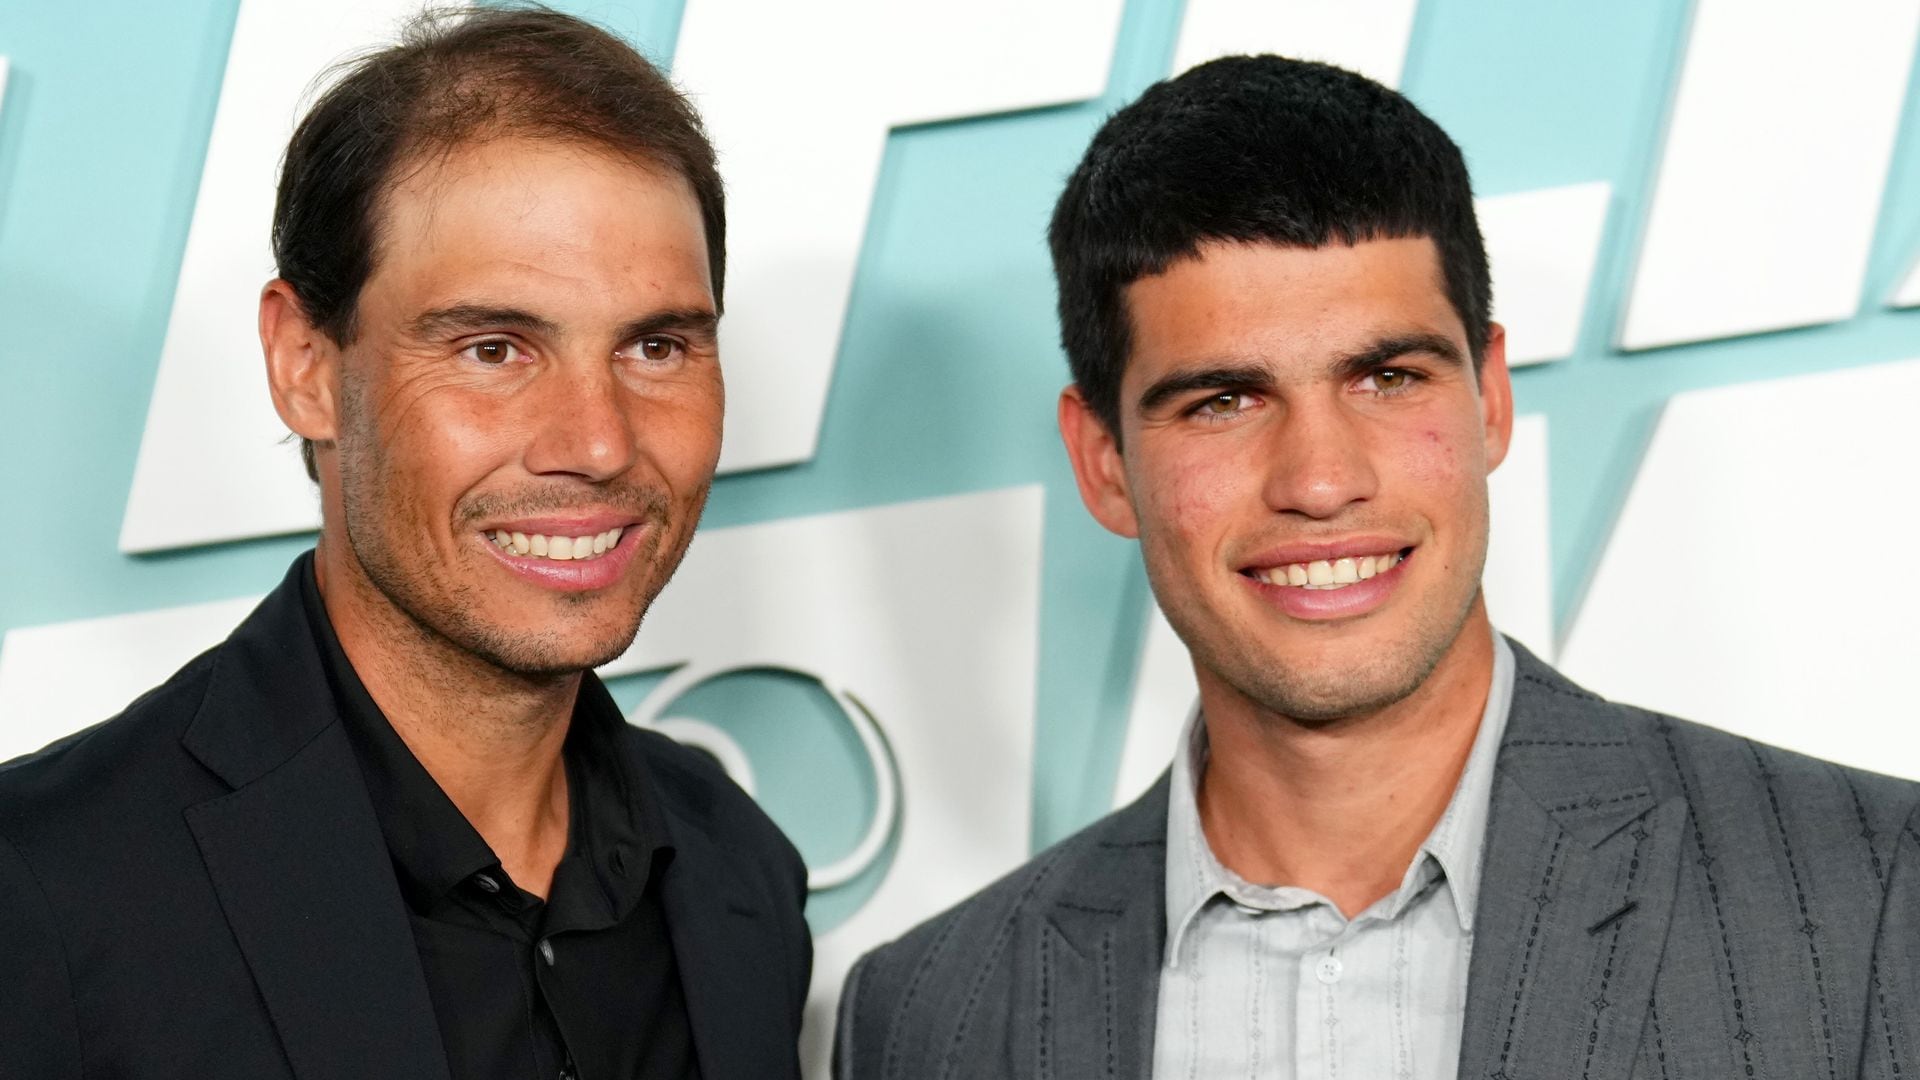 Rafael Nadal's praise for Carlos Alcaraz after winning back to back Wimbledon tournaments